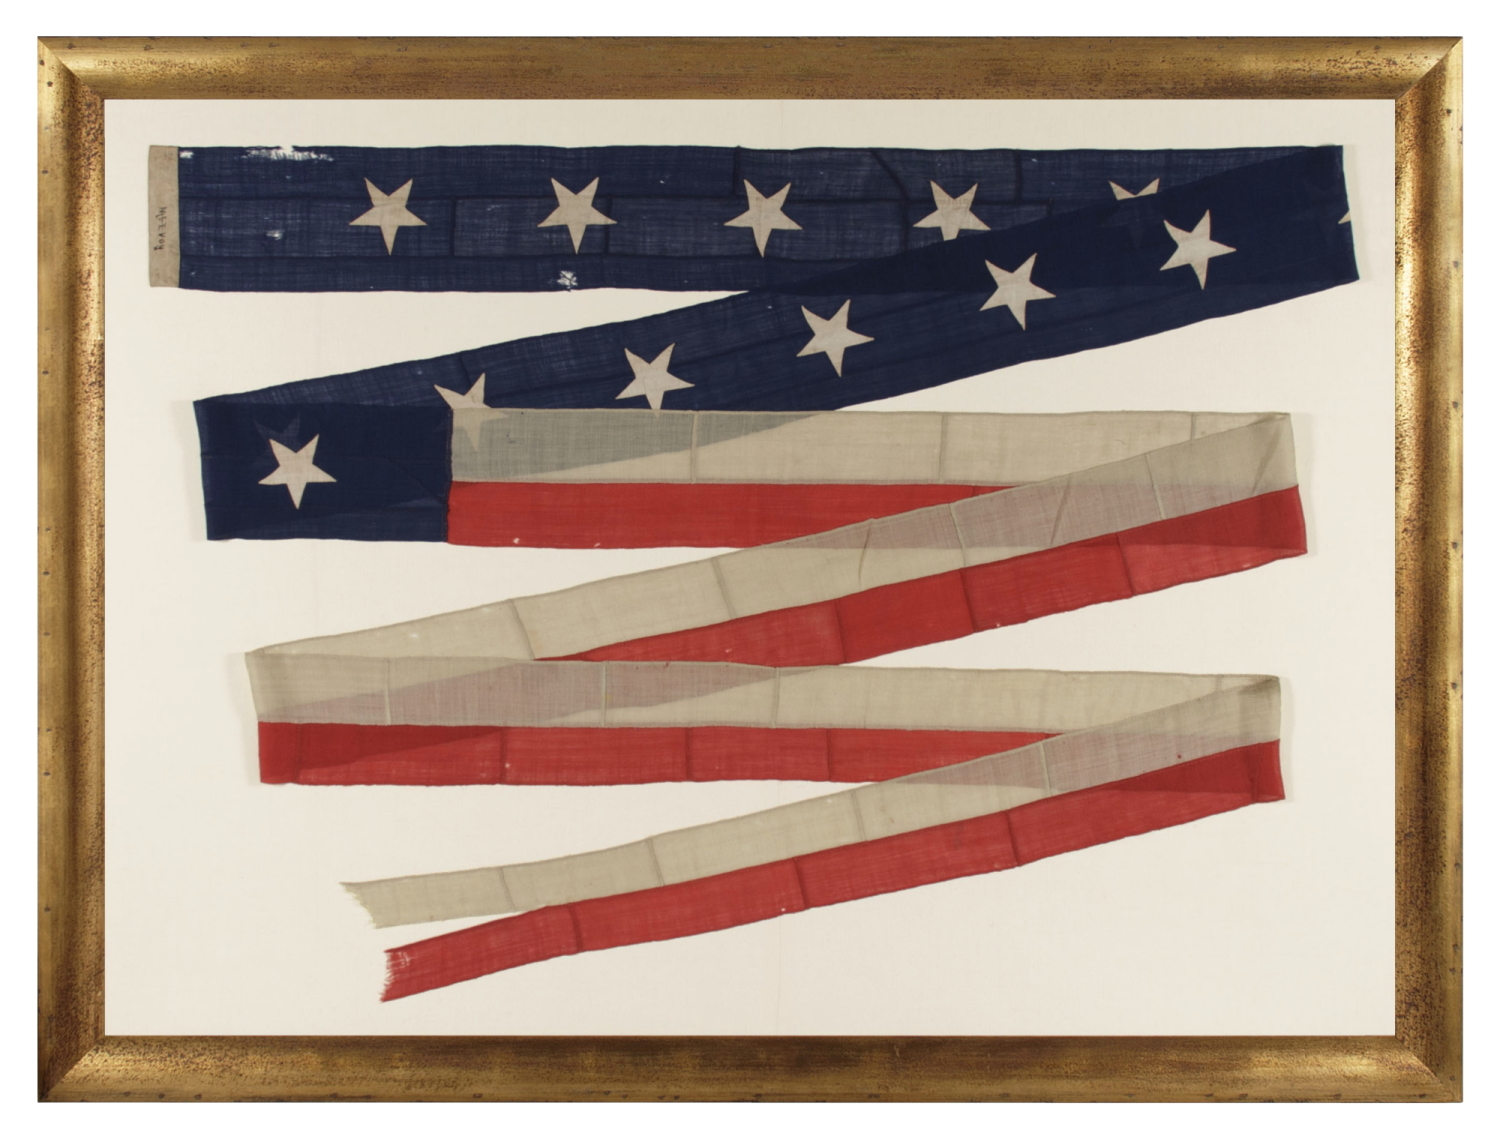 U.S. NAVY COMMISSION PENNANT OF THE CIVIL WAR PERIOD (1861-1865), WITH 13 STARS, ENTIRELY HAND SEWN, AN EXCEPTIONAL SURVIVOR